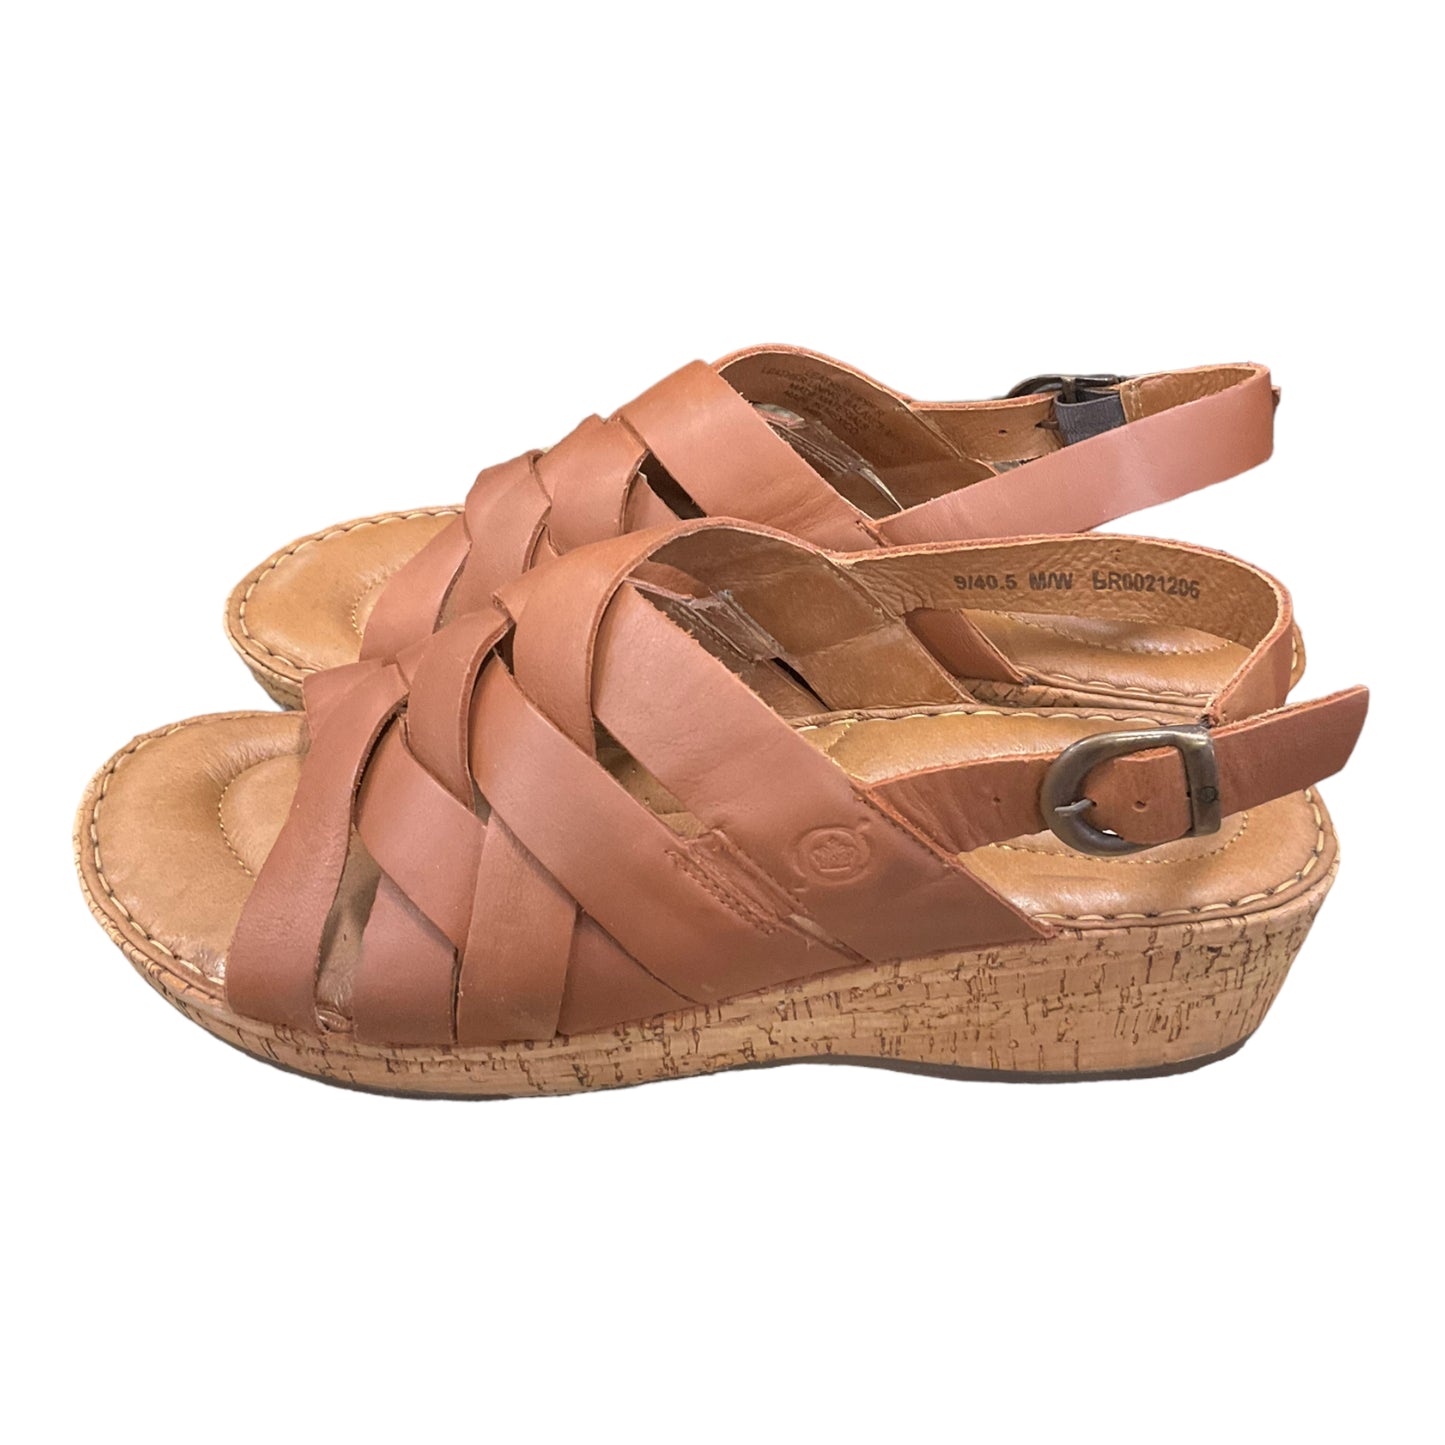 Sandals Heels Wedge By Born  Size: 9.5